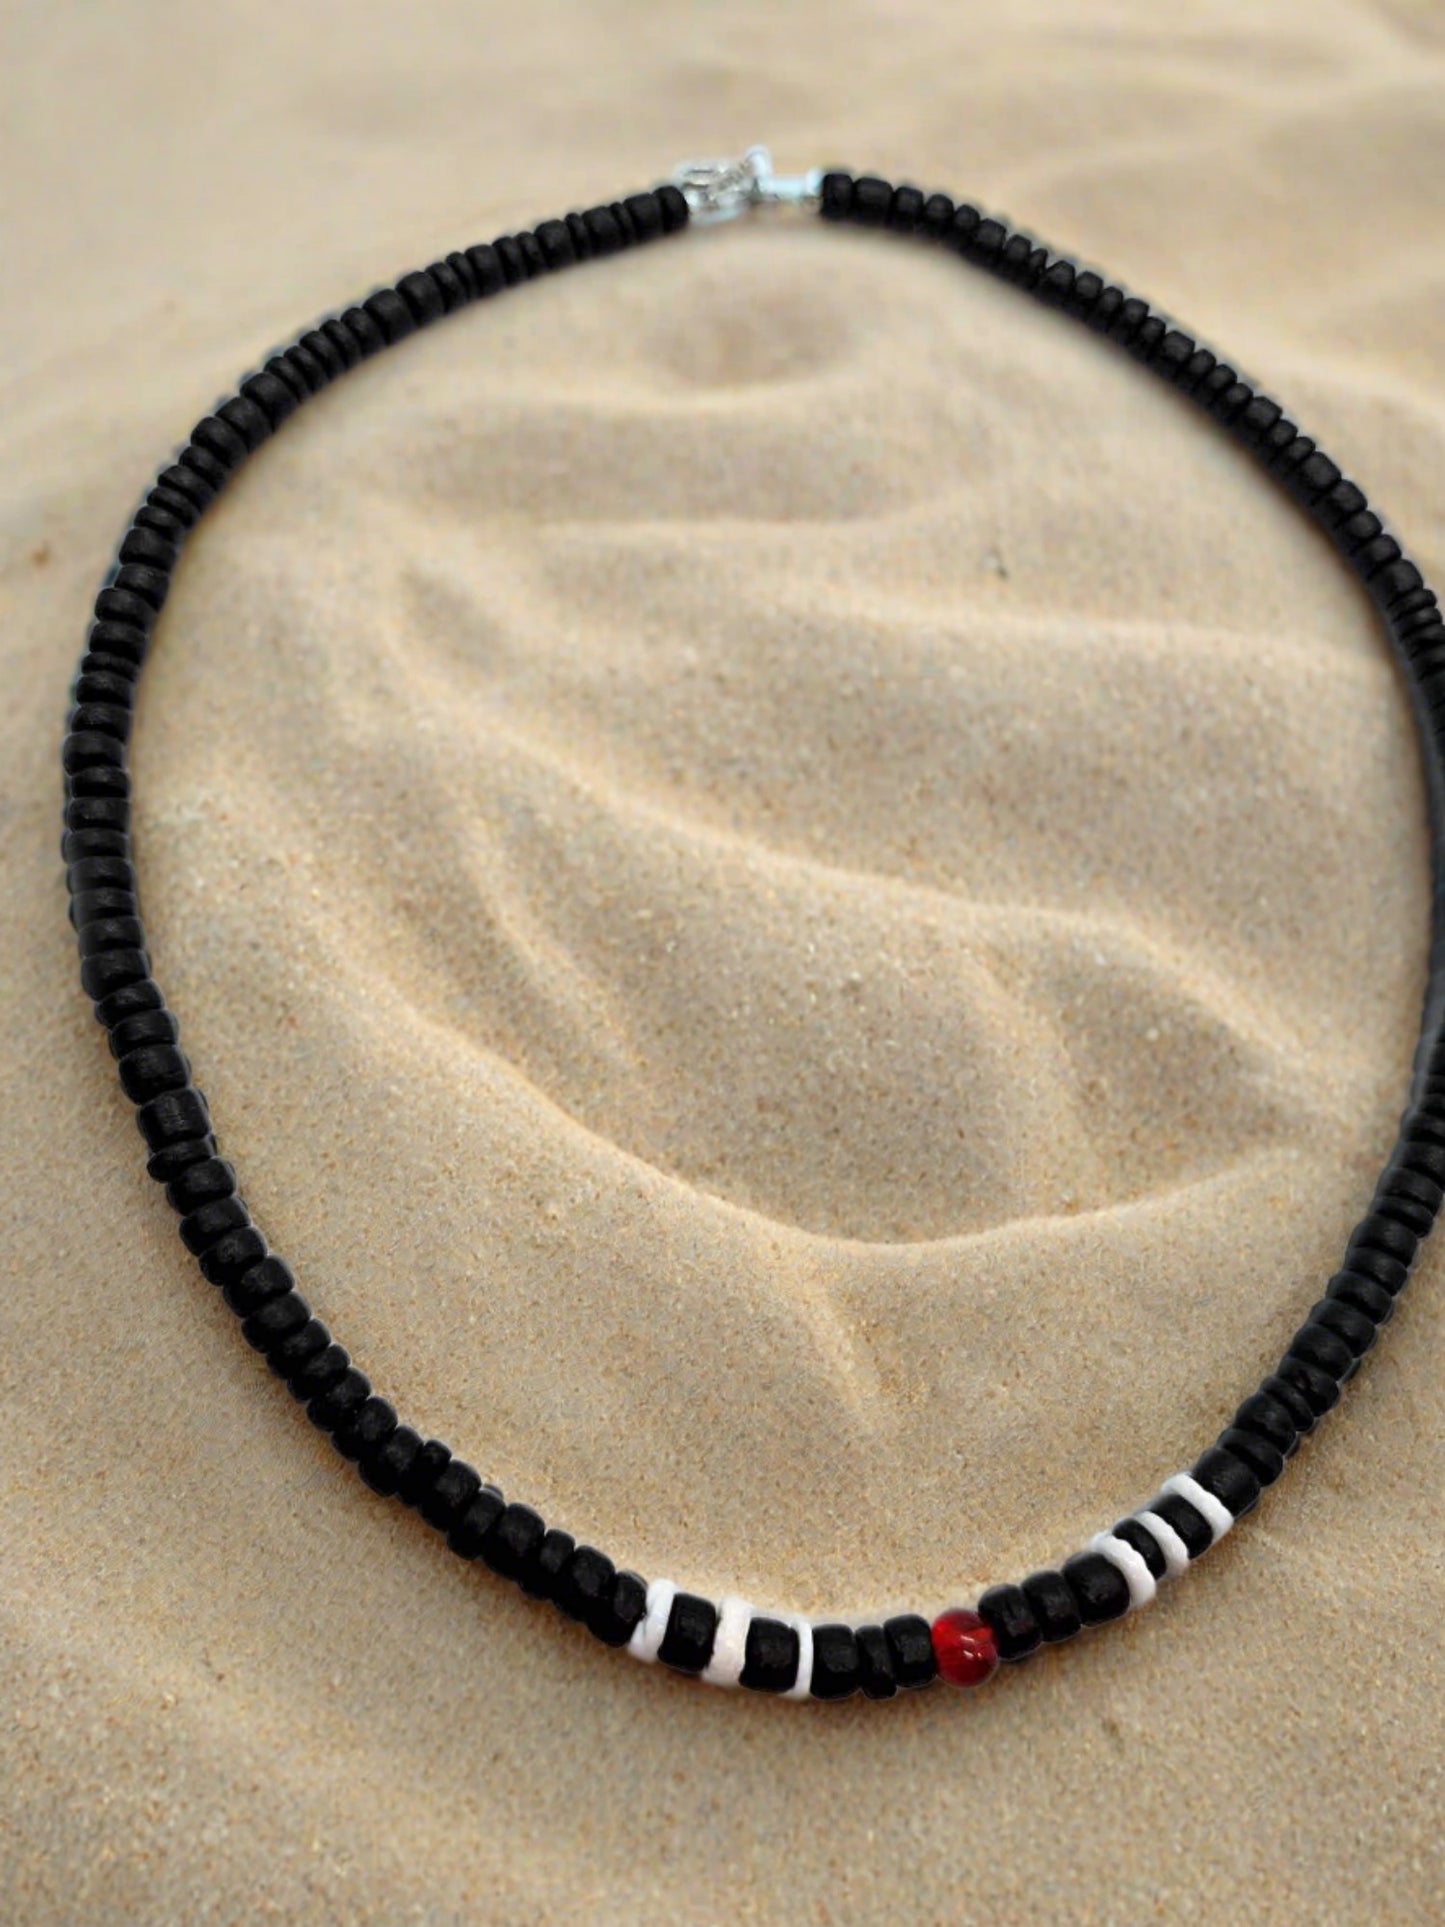 Our black wooden beaded necklace with white wood beads and a red glass bead for accents.